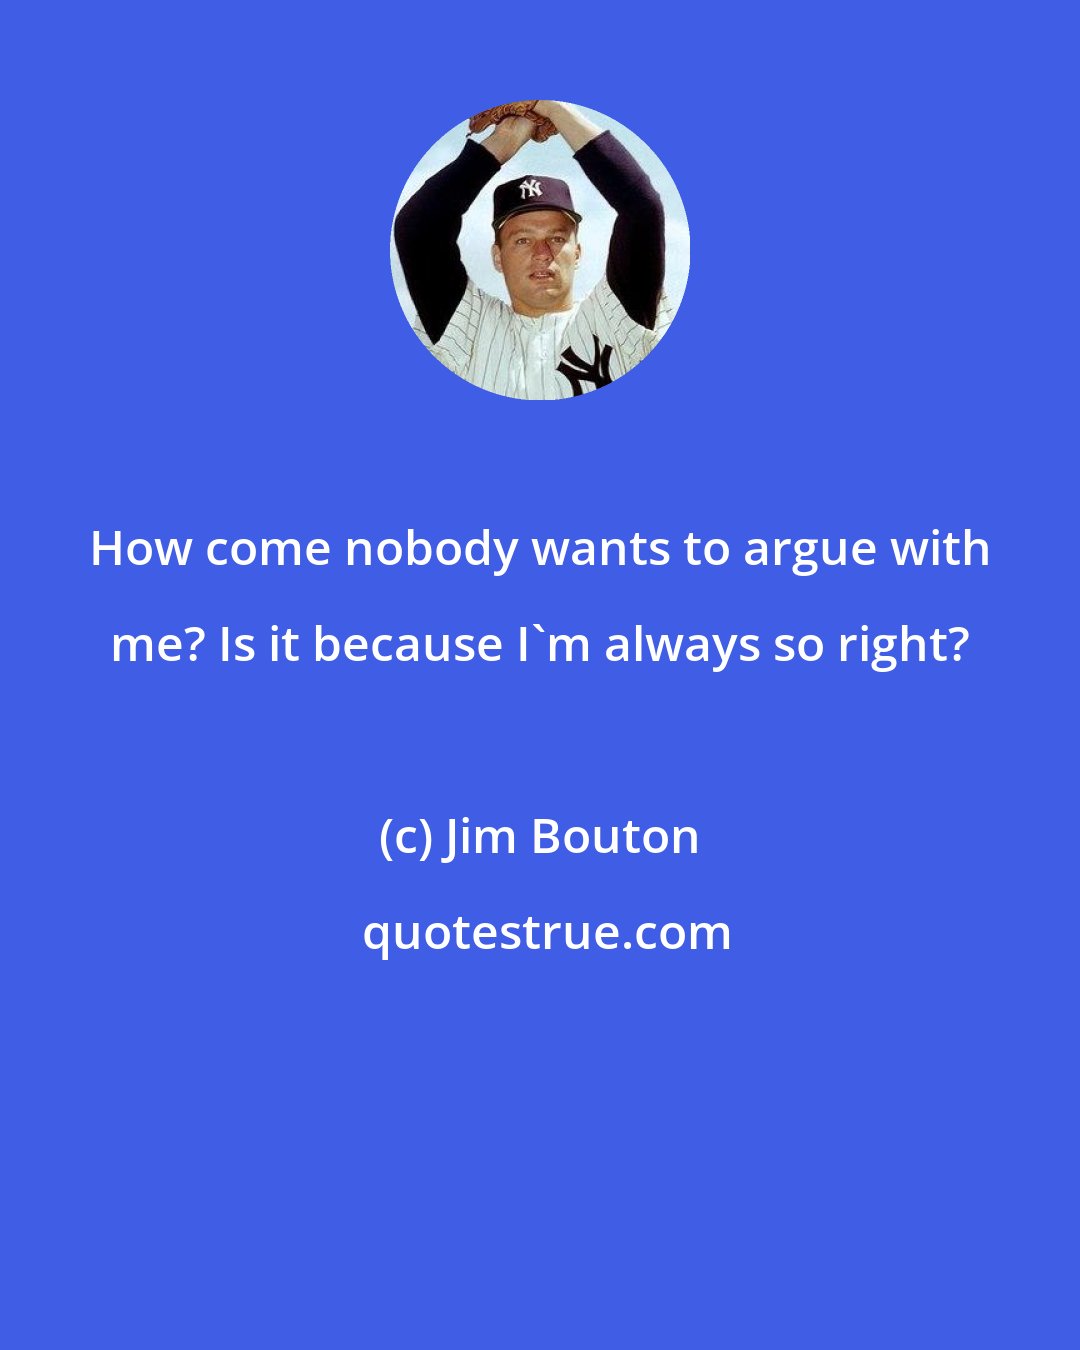 Jim Bouton: How come nobody wants to argue with me? Is it because I'm always so right?